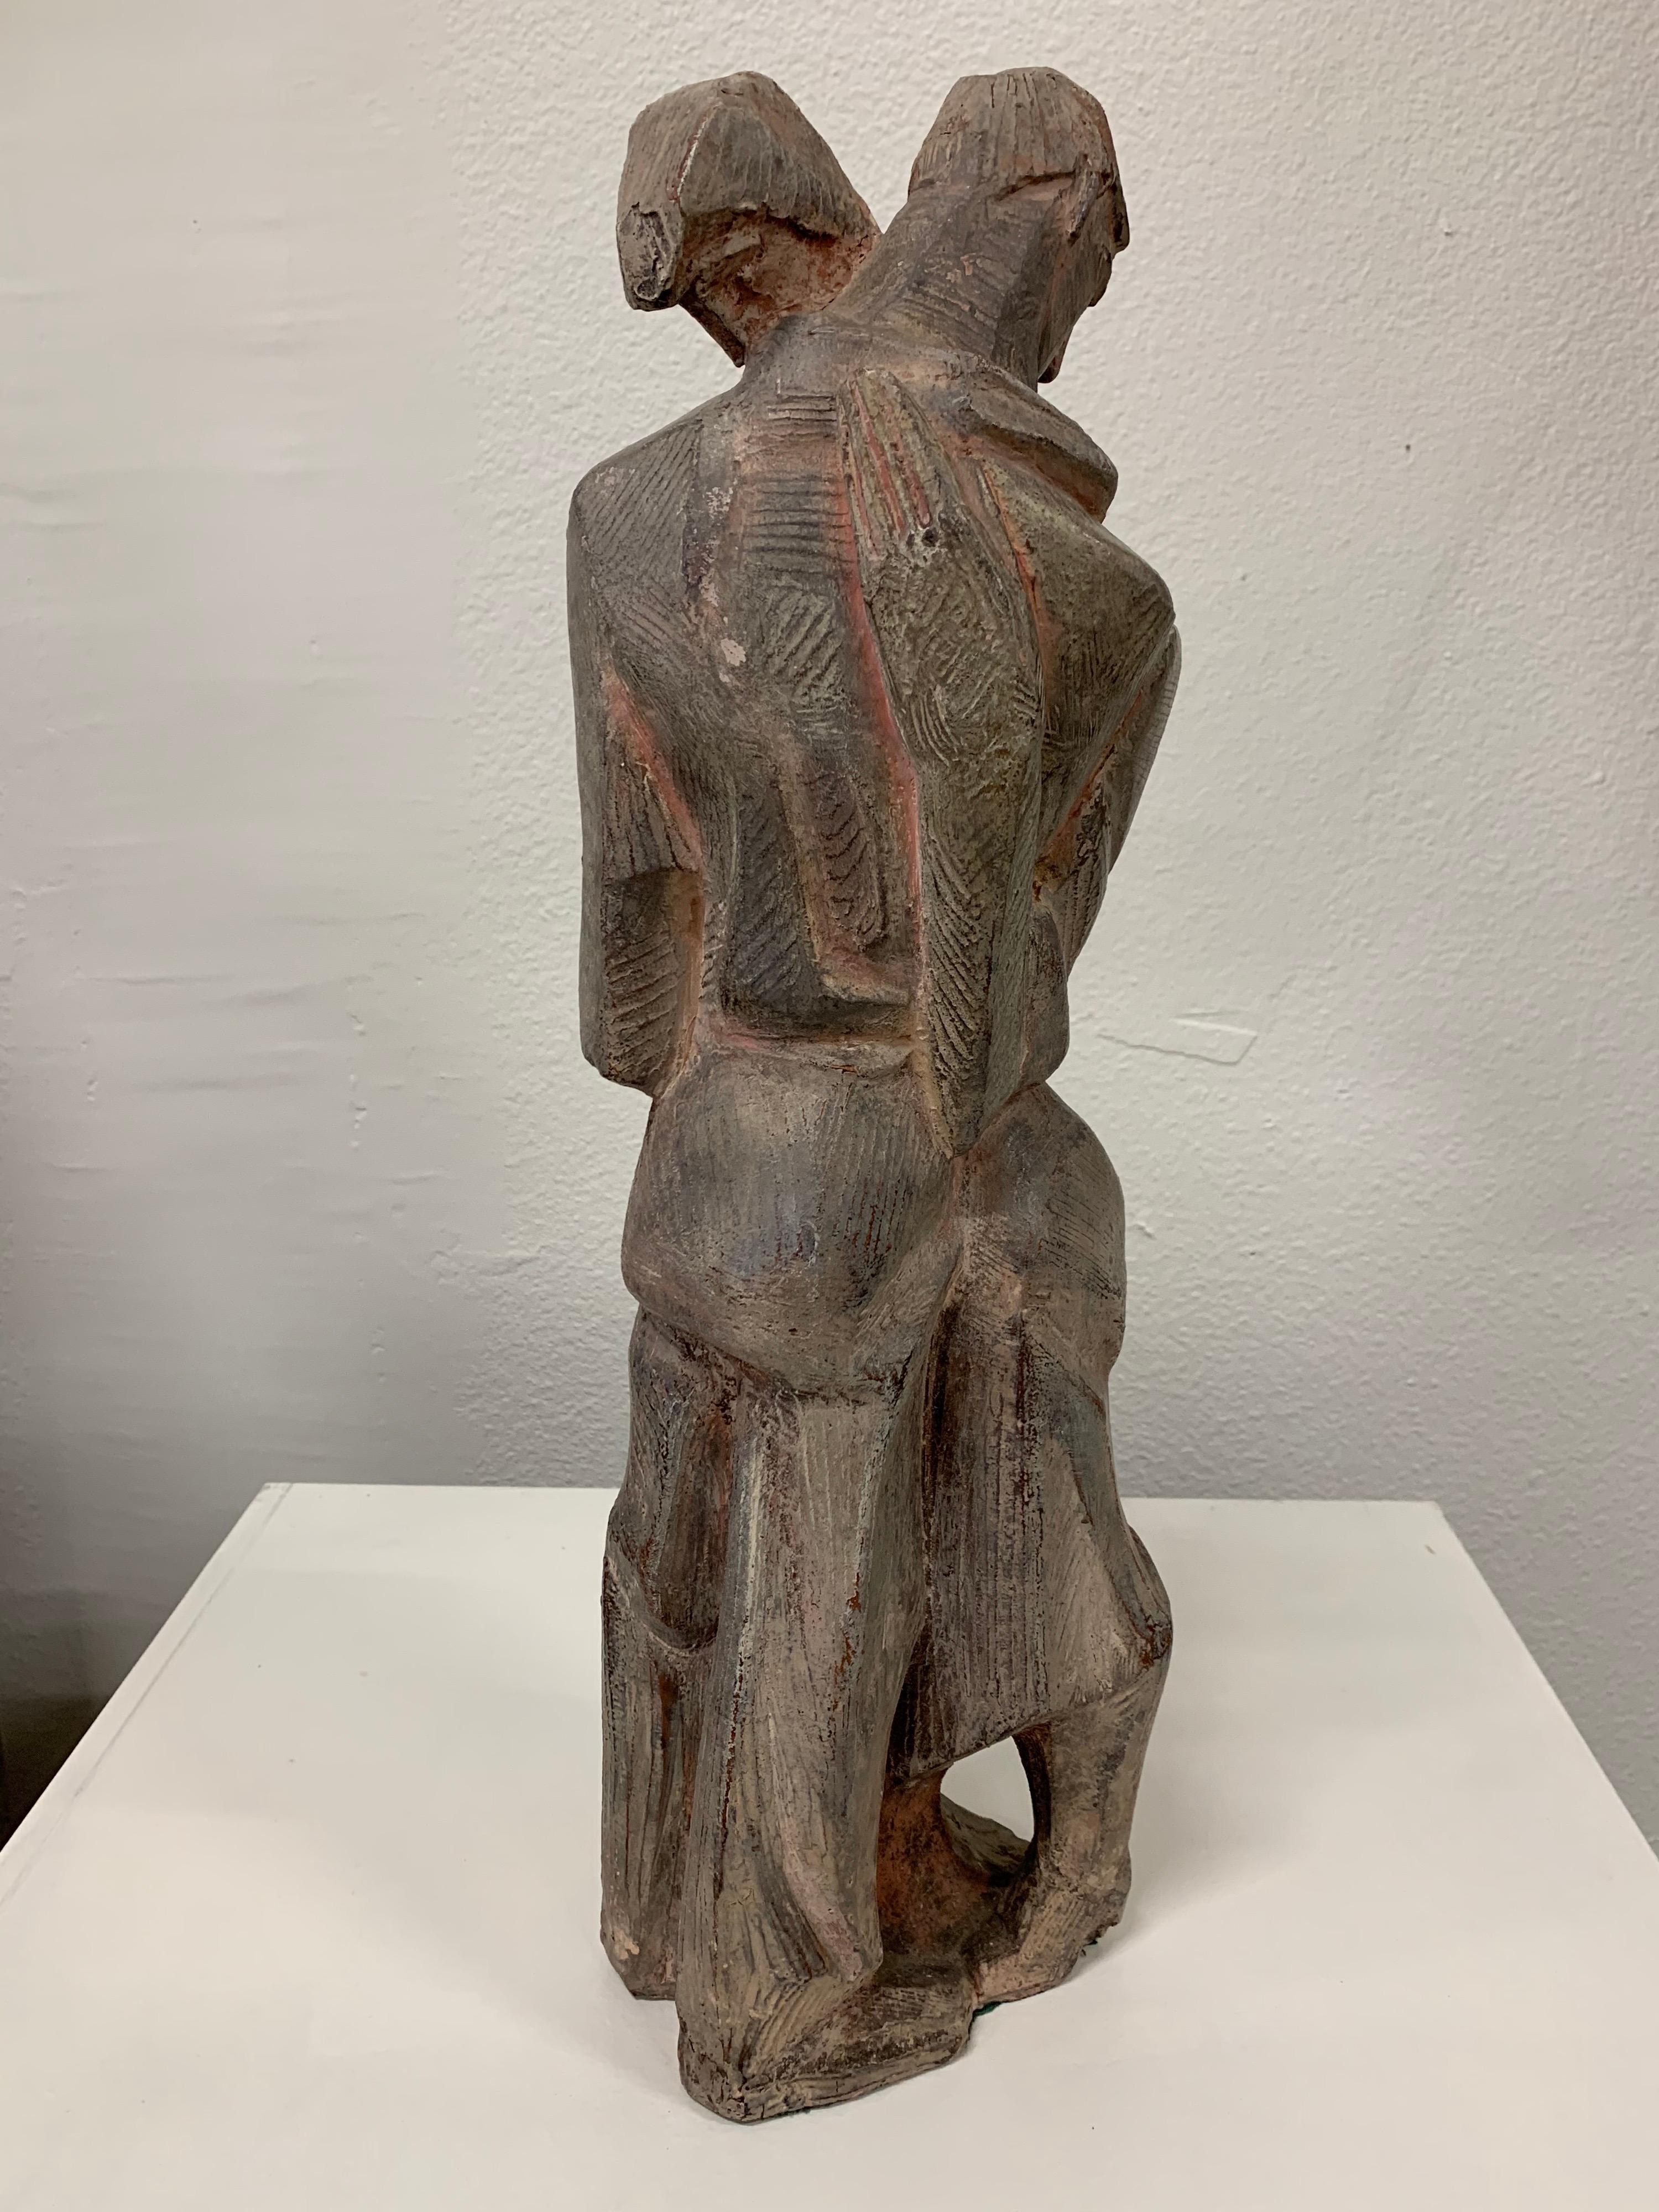 A wonderful terracotta sculpture by the noted American artist Albert Wein. He was a WPA artist and became an important California influence. It bears a paper label which is faded but reads; Albert Wein ??y Hill Lover. The rest is too worn to read.